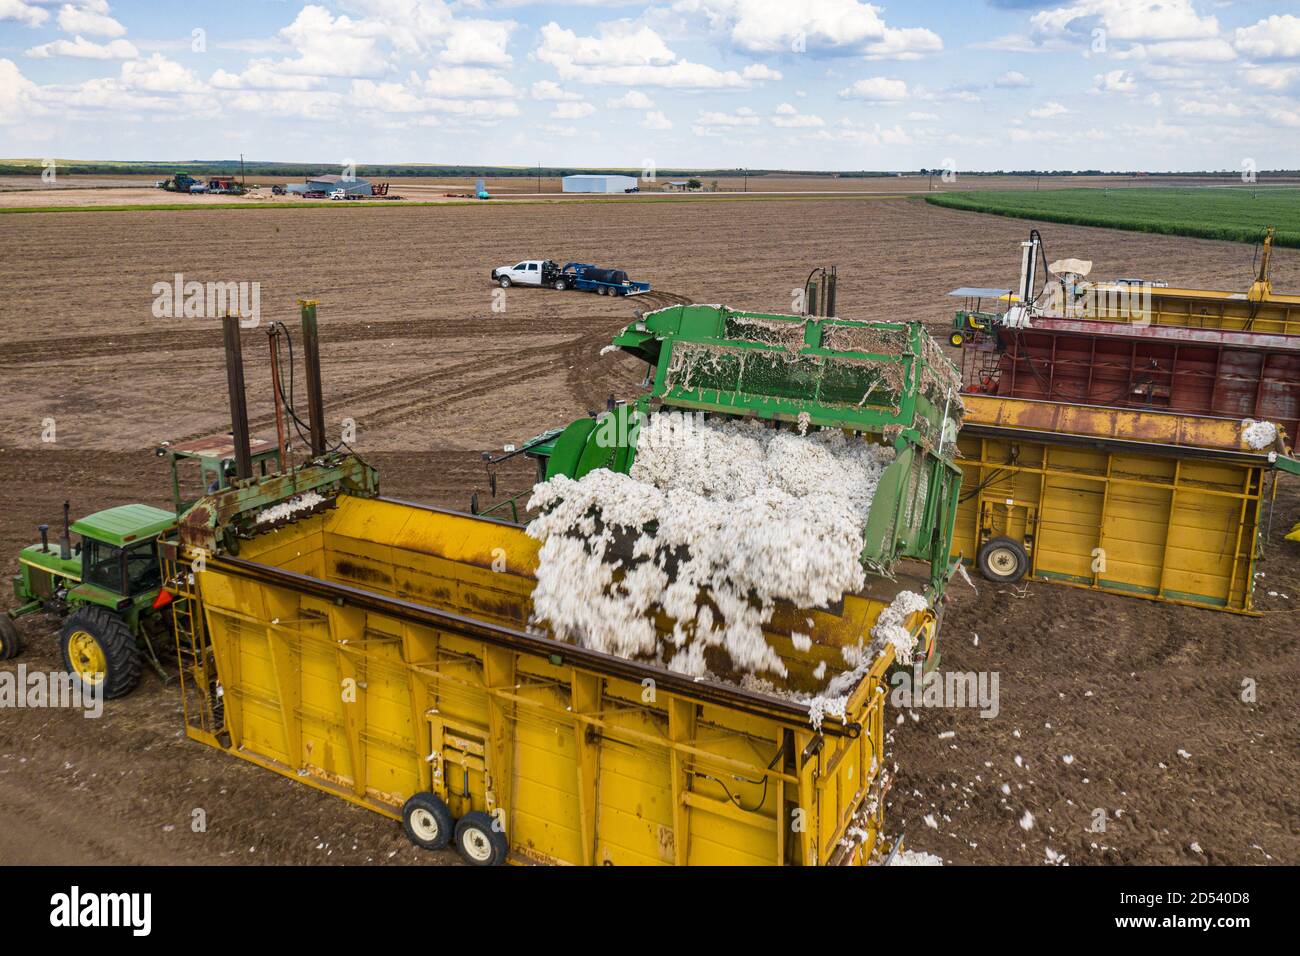 A speciality harvester unloads cotton bolls into a cotton module builders at his the Schirmer Farm during the cotton harvest August 25, 2020 in Batesville, Texas. Stock Photo